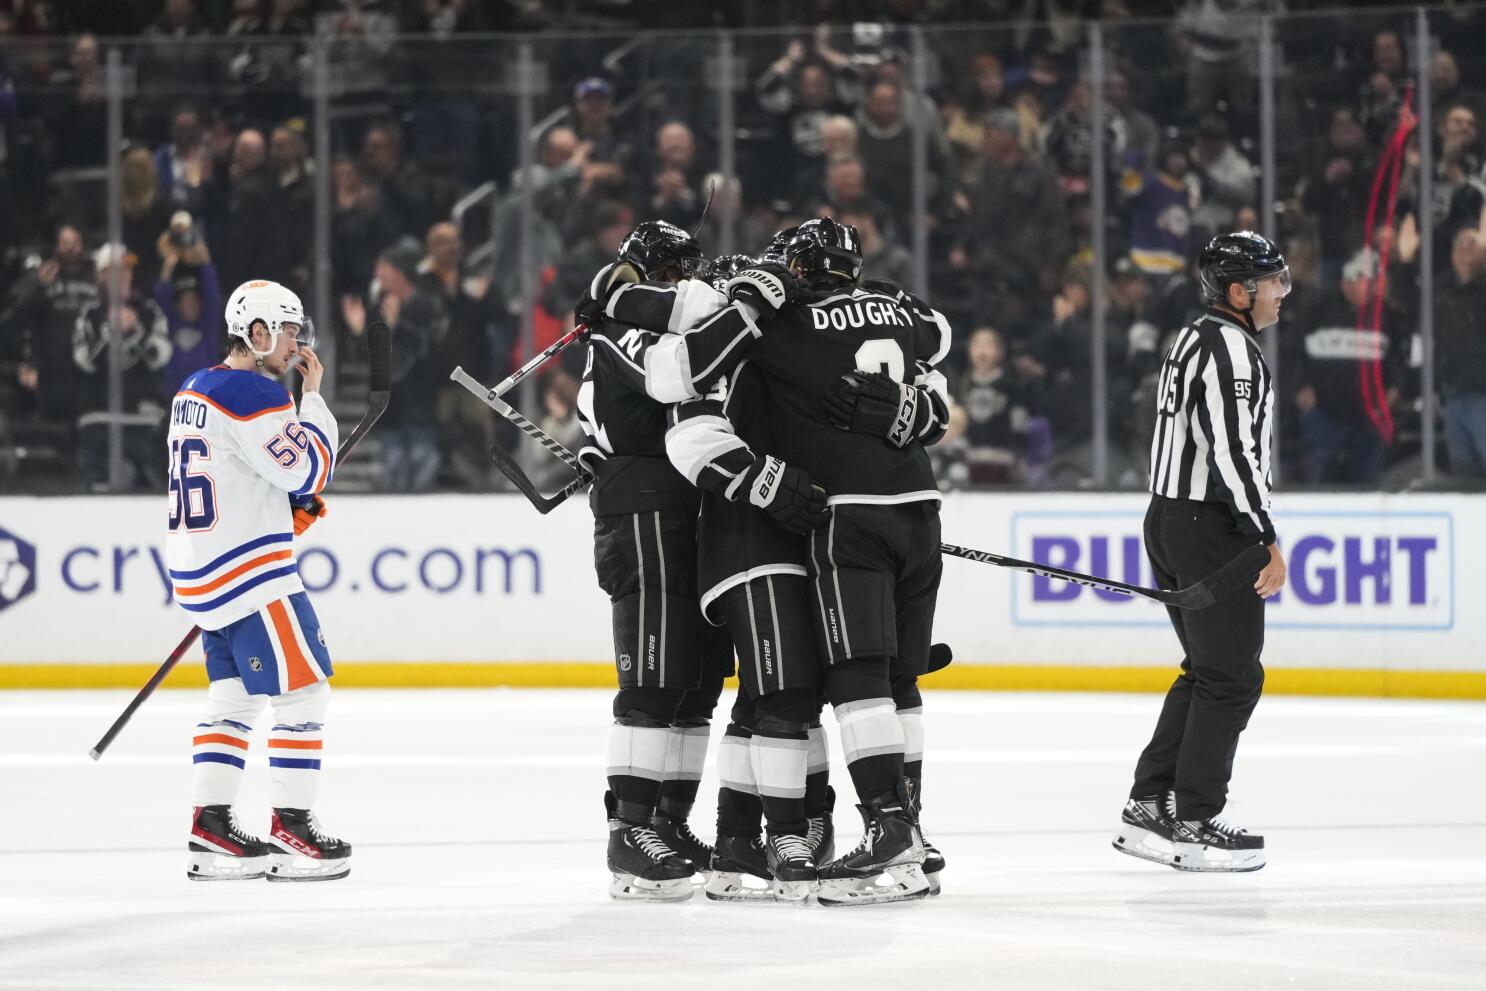 Kings' Doughty eager to battle McDavid, Oilers in playoffs